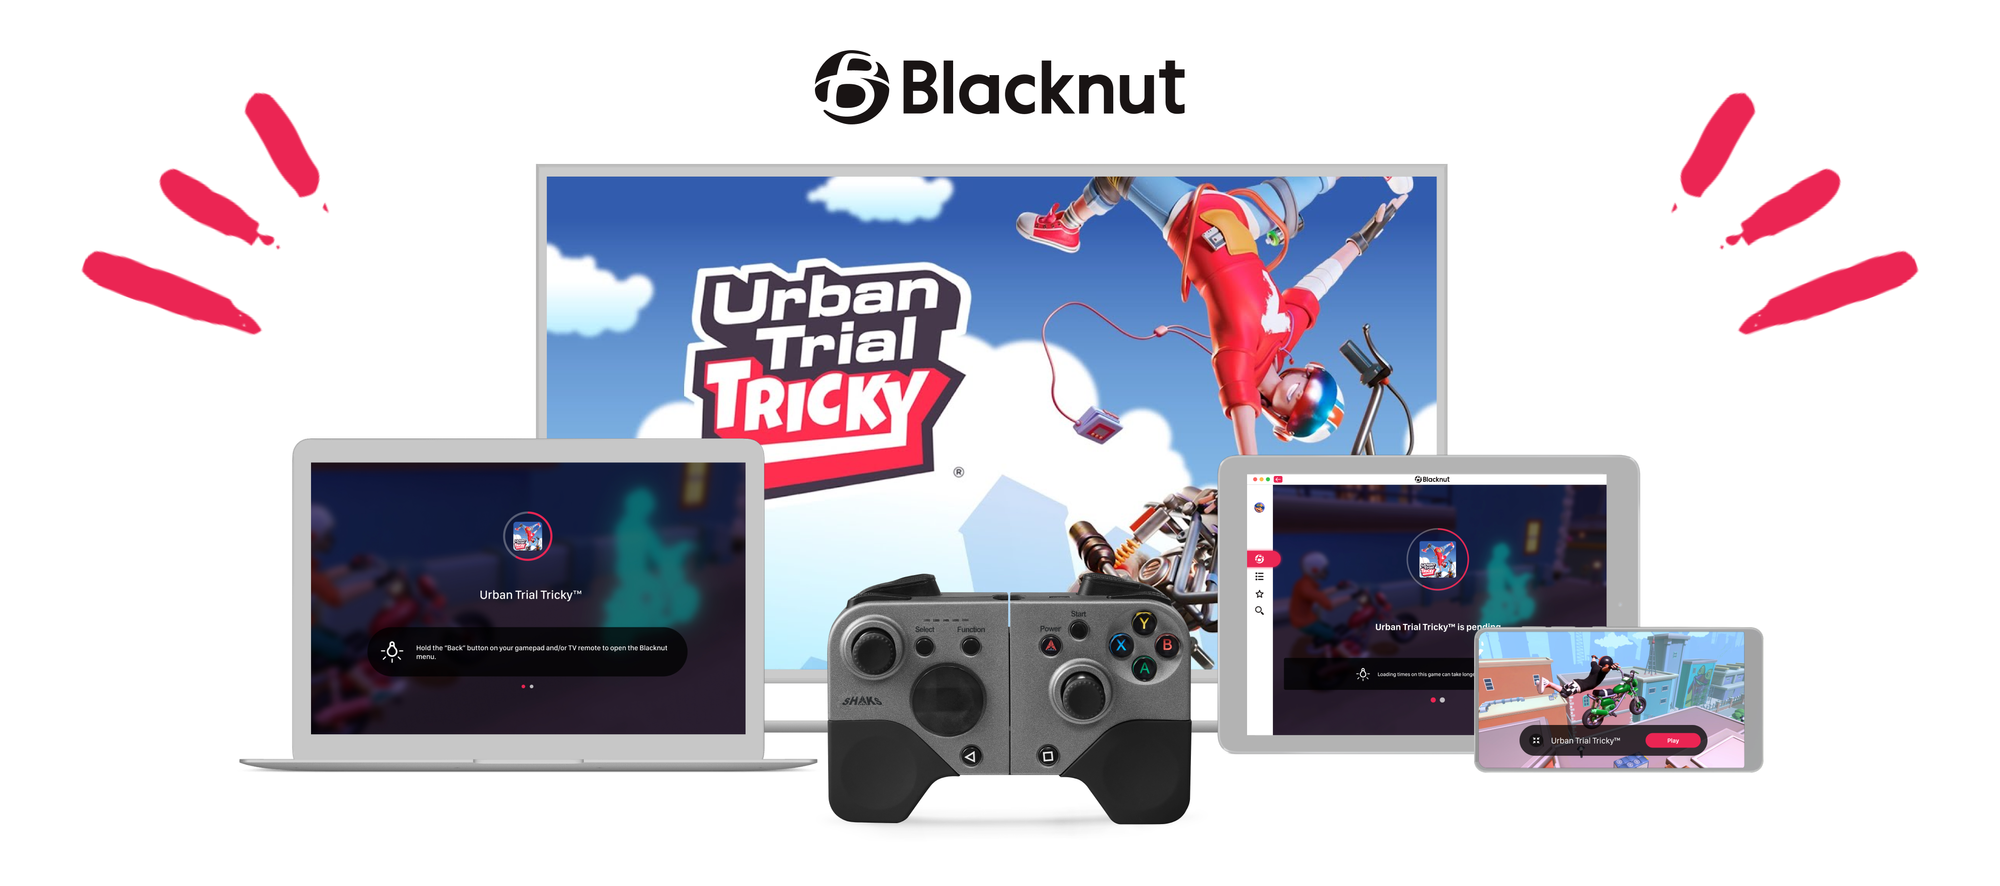 Everyone gets to try Blacknut Cloud Gaming with a FREE 1-month subscription!